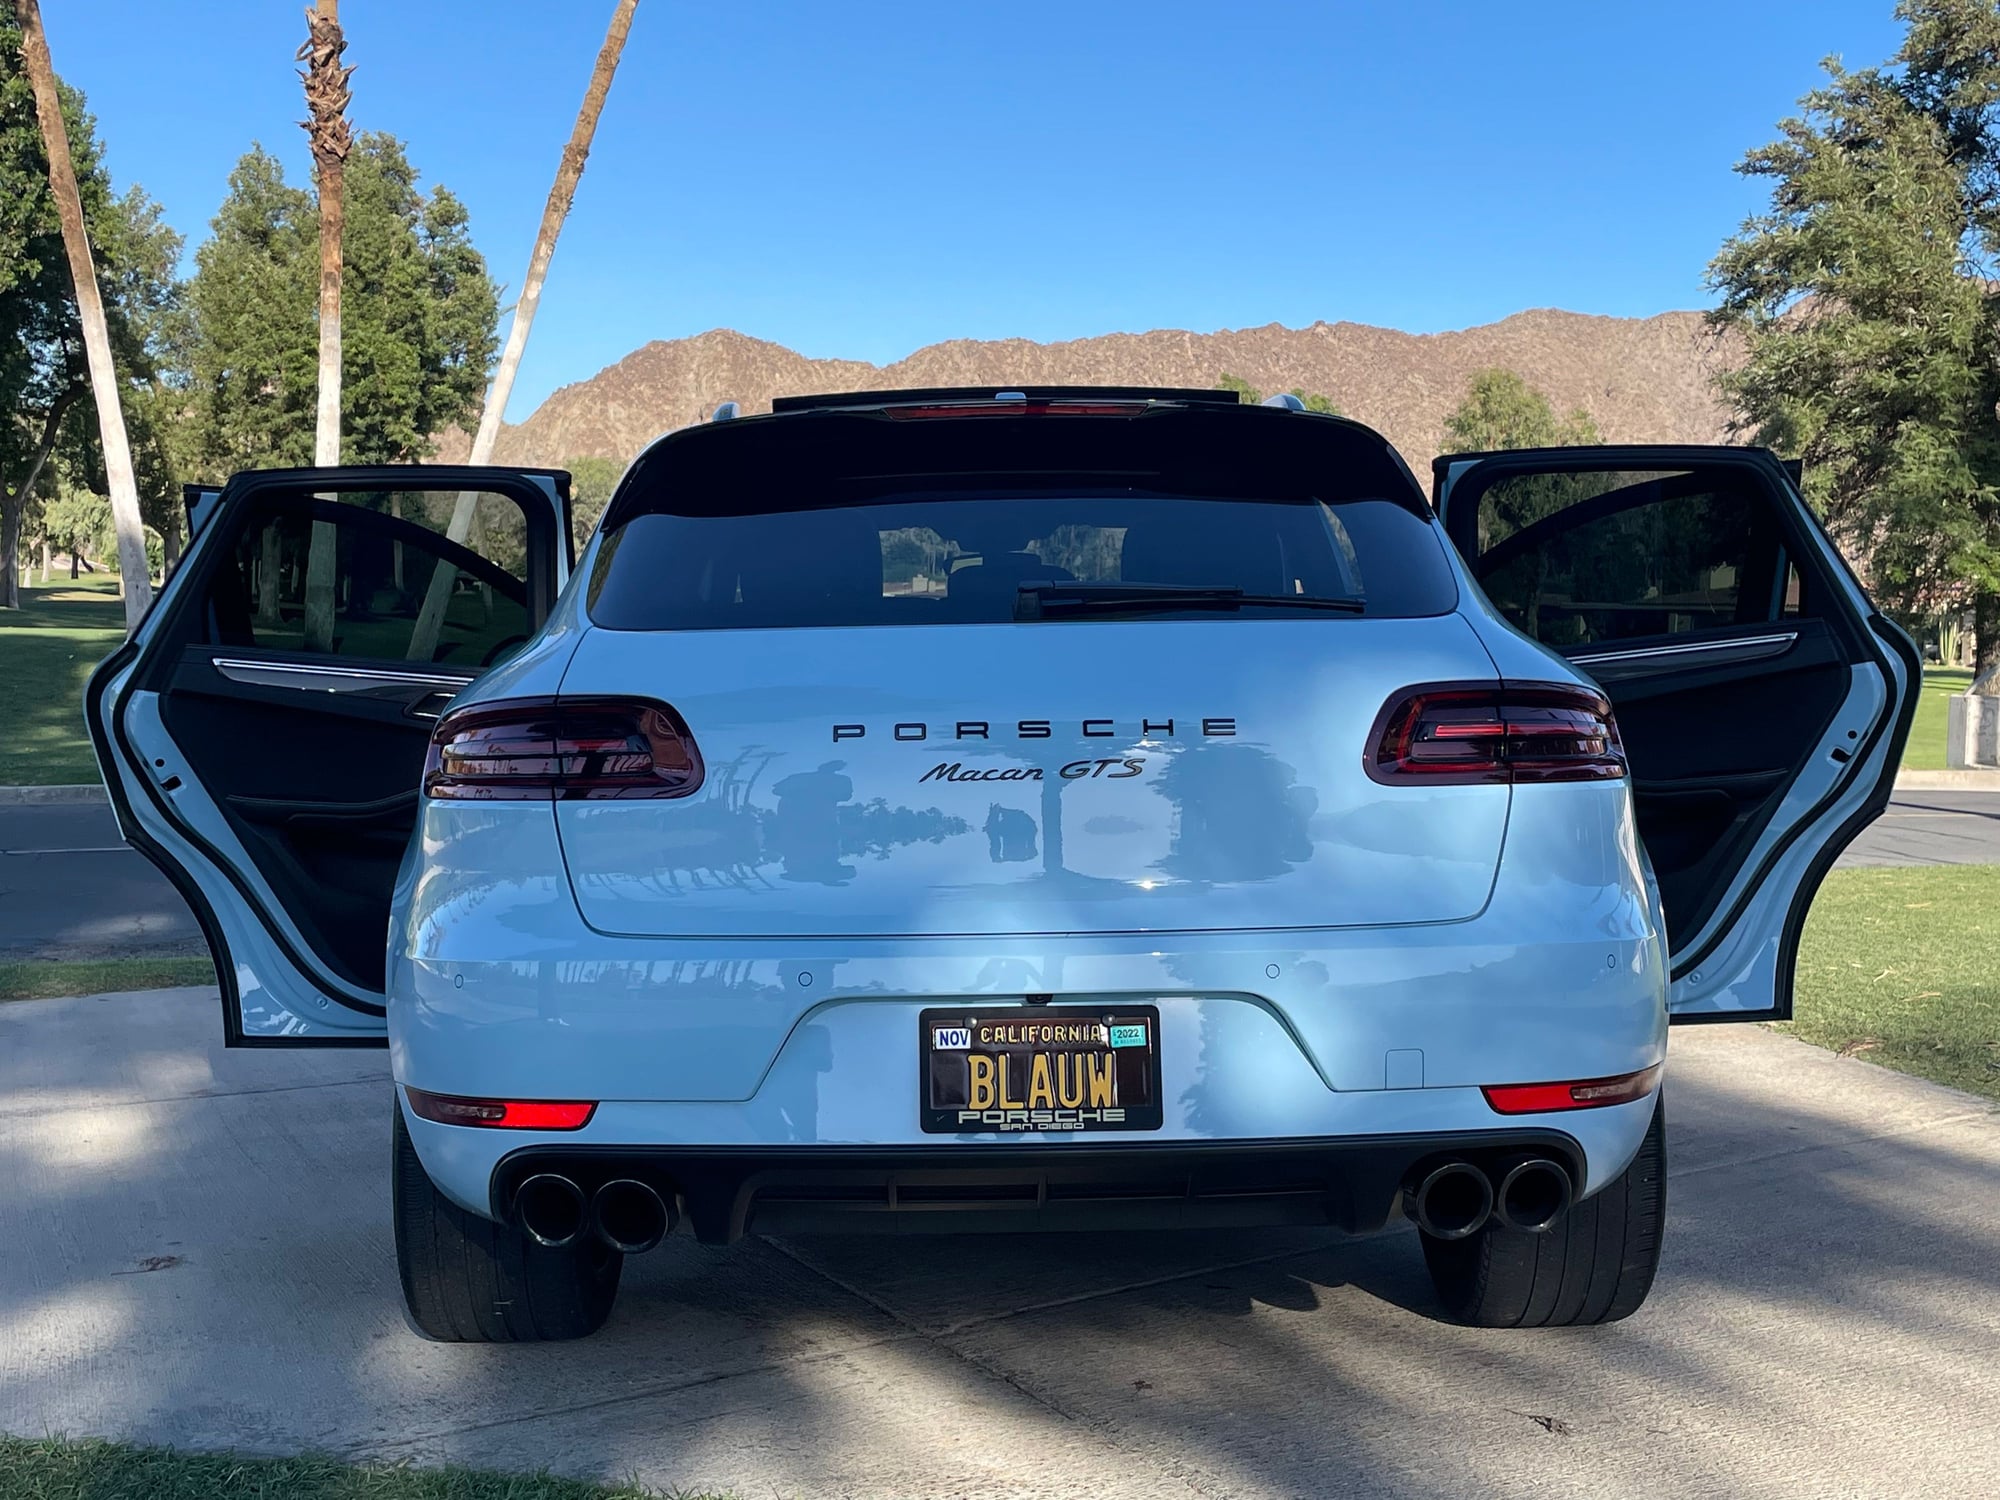 2018 Porsche Macan - 2018 Macan GTS in PTS Gulf Blue - Used - VIN WP1AG2A52JLB61213 - 34,500 Miles - 6 cyl - AWD - Automatic - SUV - Blue - Indian Wells, CA 92110, United States